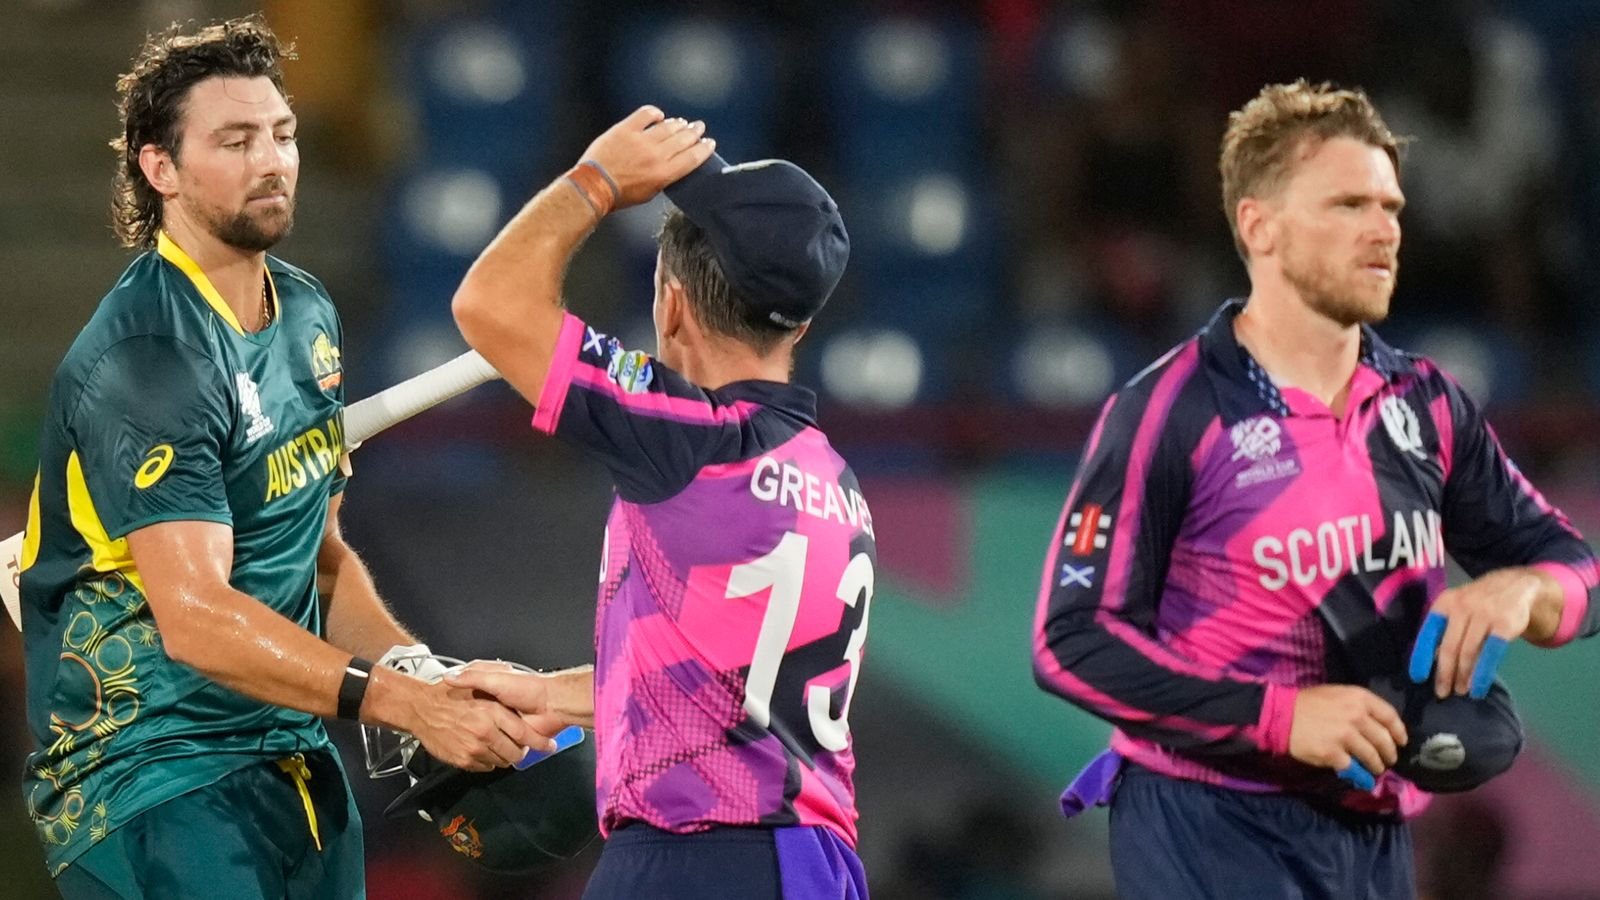 England qualify for T20 World Cup Super 8s as Australia knock out Scotland after huge scare in St Lucia | Cricket News